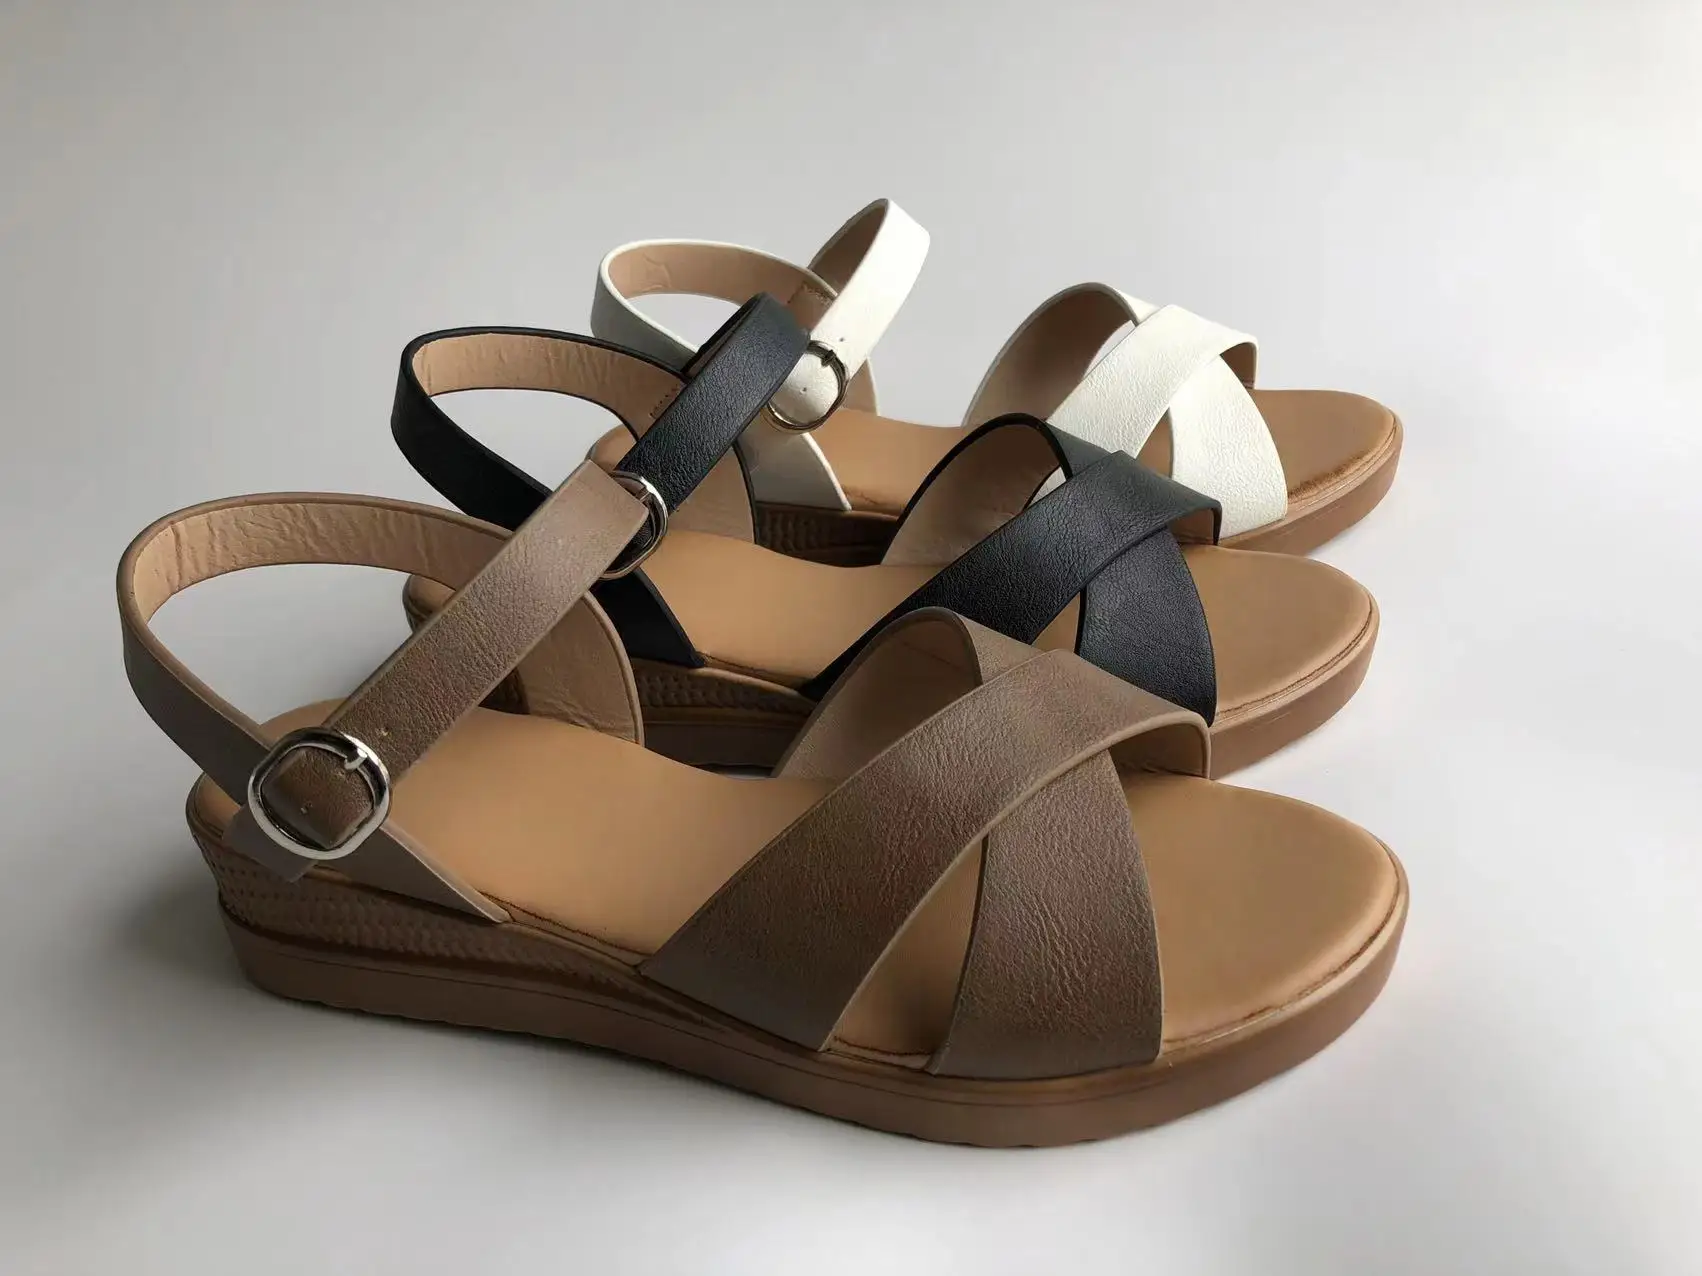 High Quality female wedge sandals shoes women comfort sandals